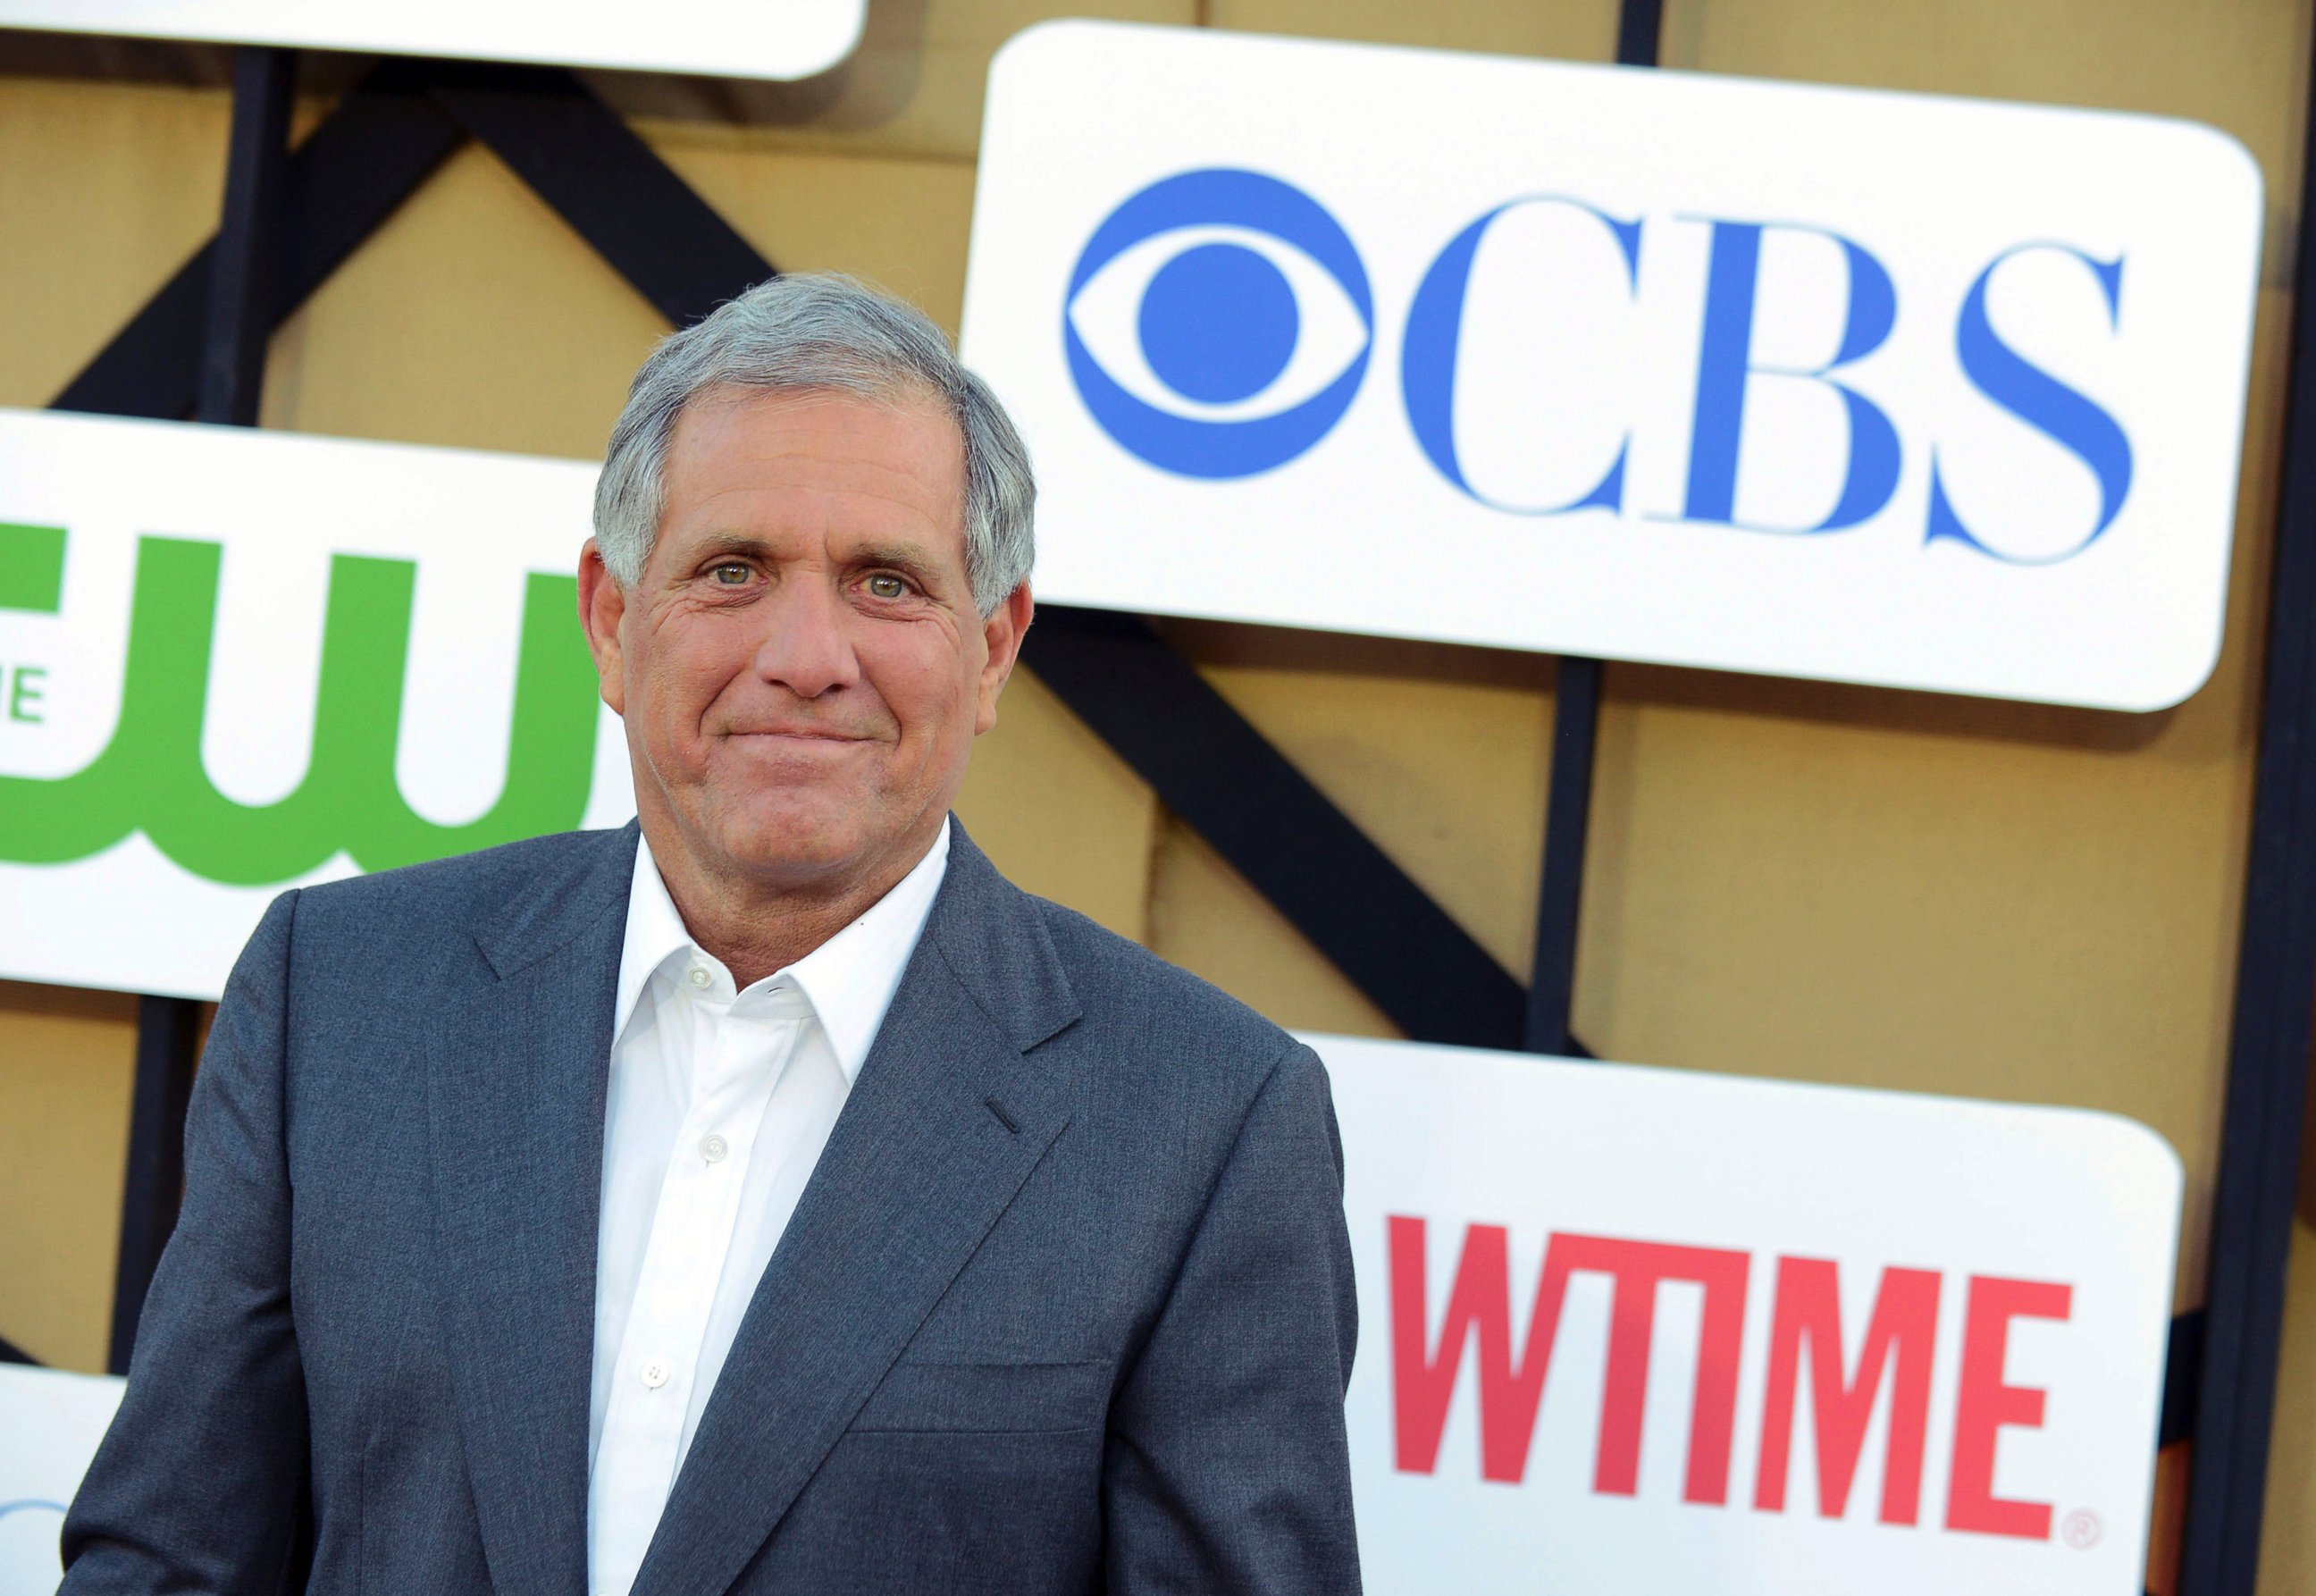 In this July 29, 2013 file photo, Les Moonves arrives at the CBS, CW and Showtime TCA party at The Beverly Hilton in Beverly Hills, Calif.